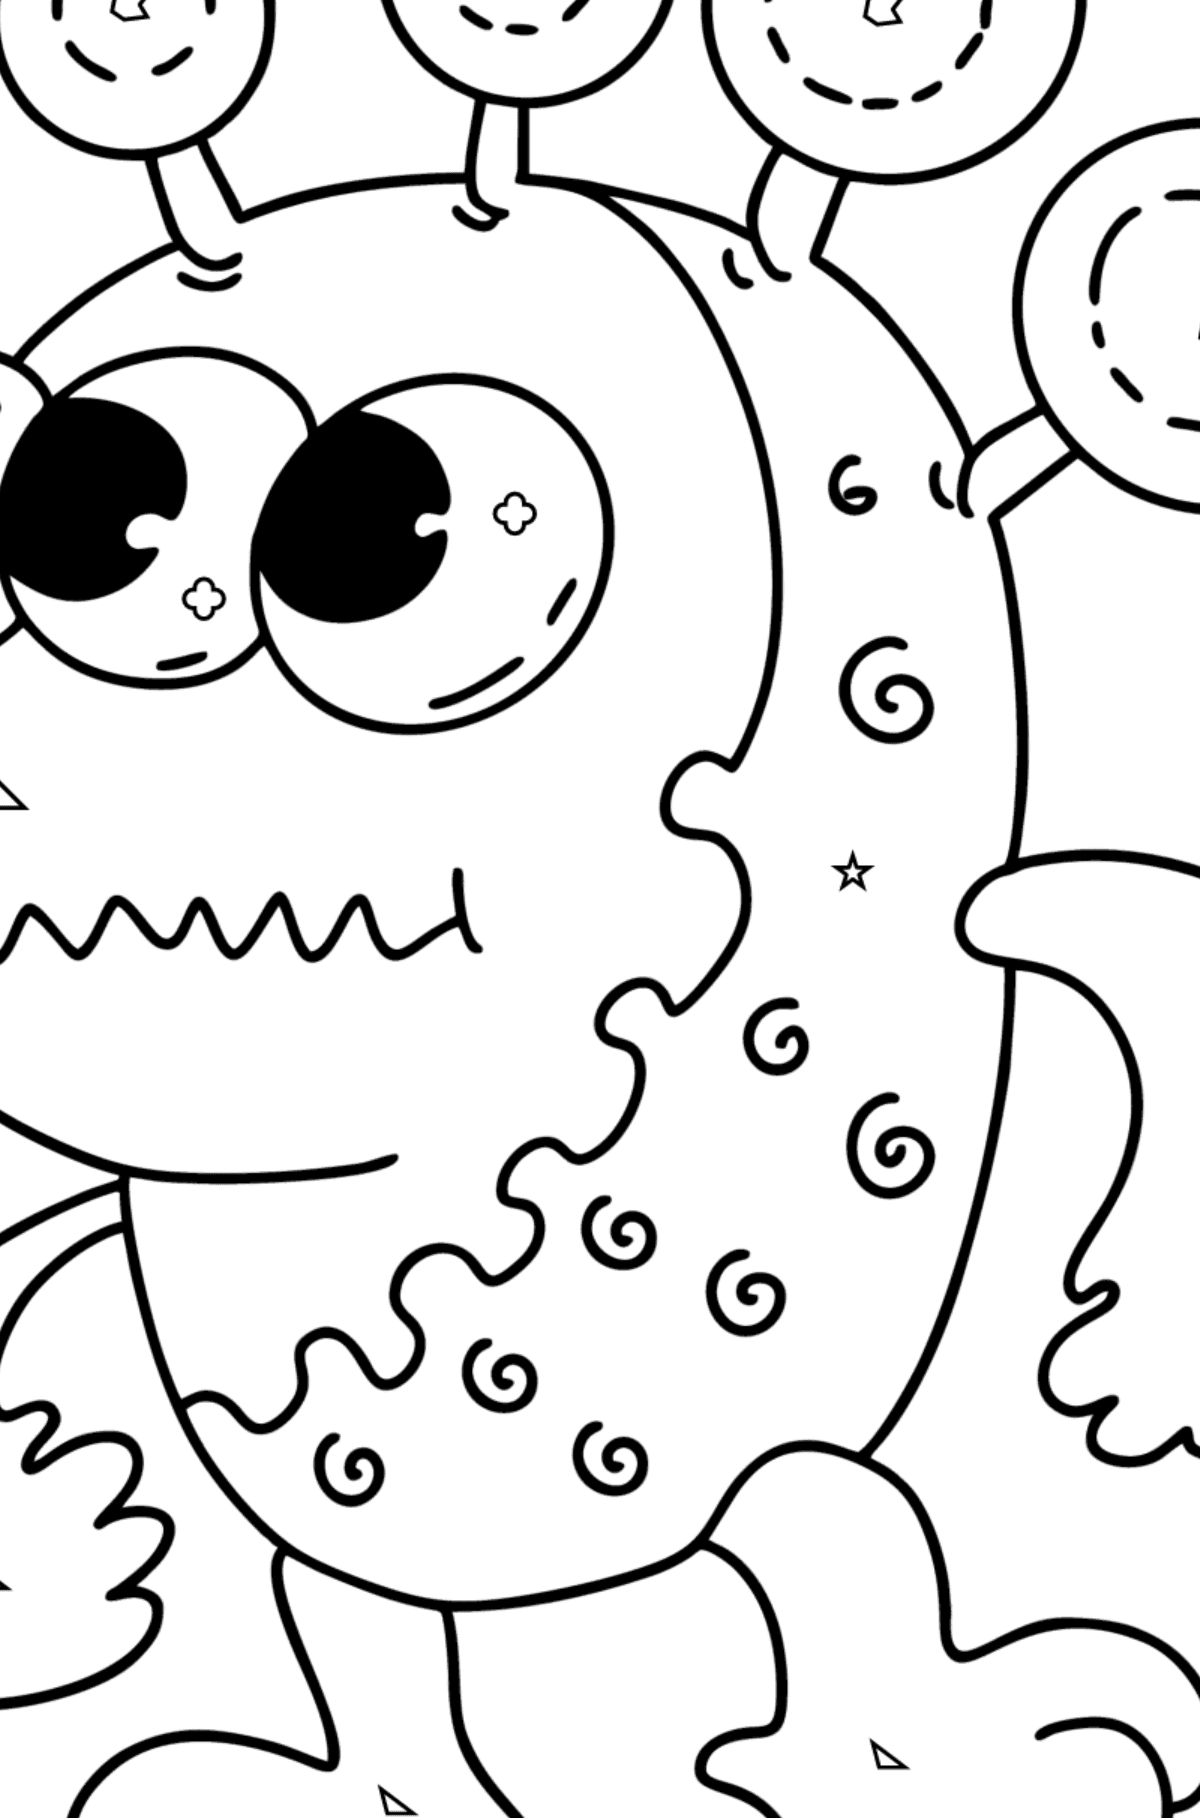 Funny Alien Coloring page - Coloring by Geometric Shapes for Kids